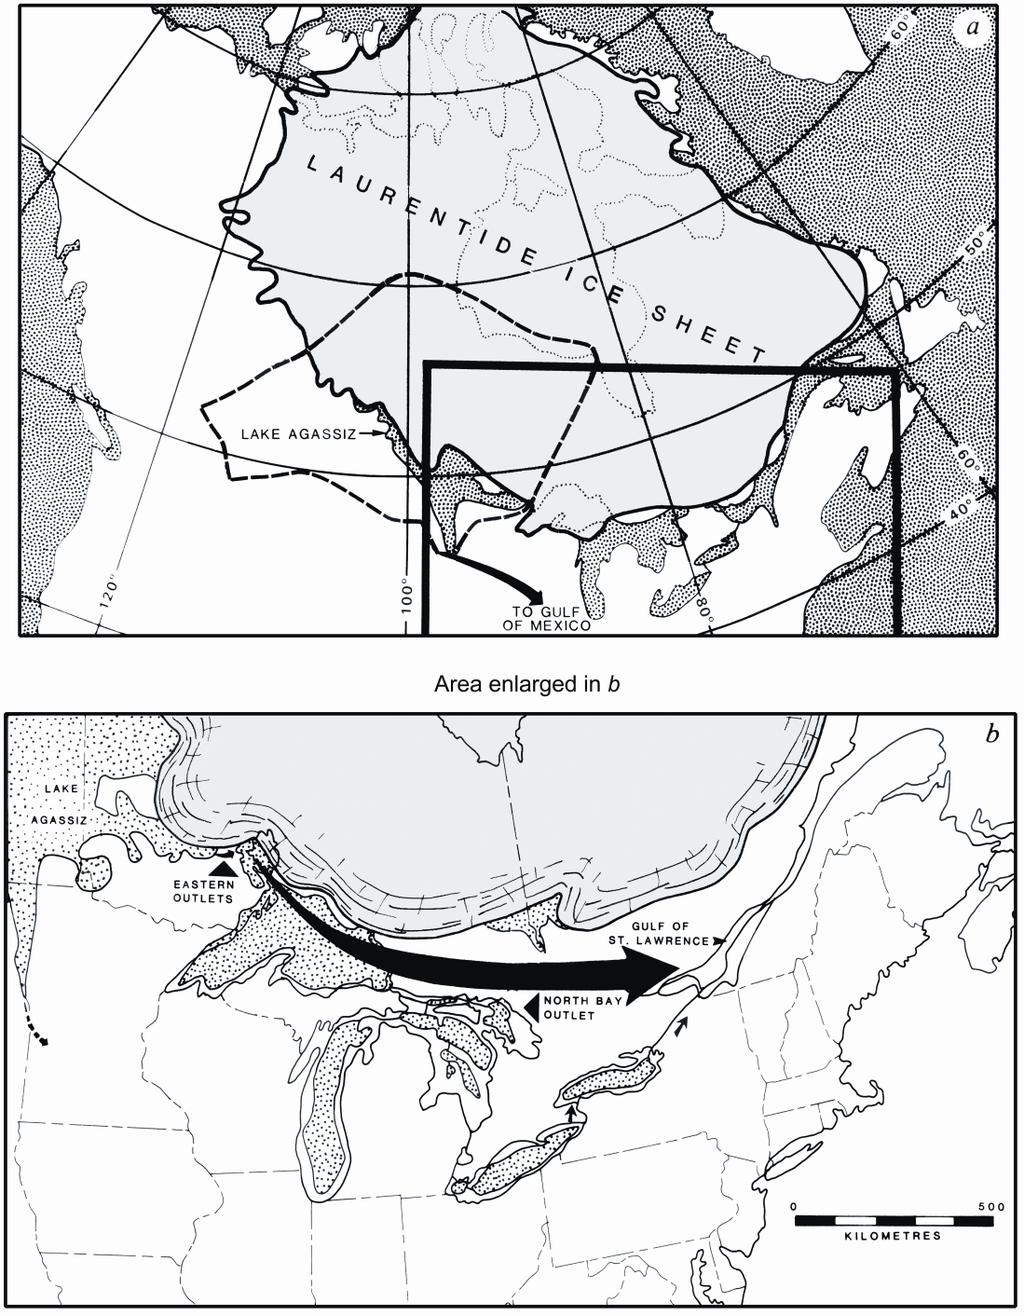 The Laurentide Ice Sheet and the routing of overflow from the Lake Aggasiz basin (dashed line) to the Gulf of Mexico just before the Younger Dryas (a) and routing of overflow from Lake Aggasiz